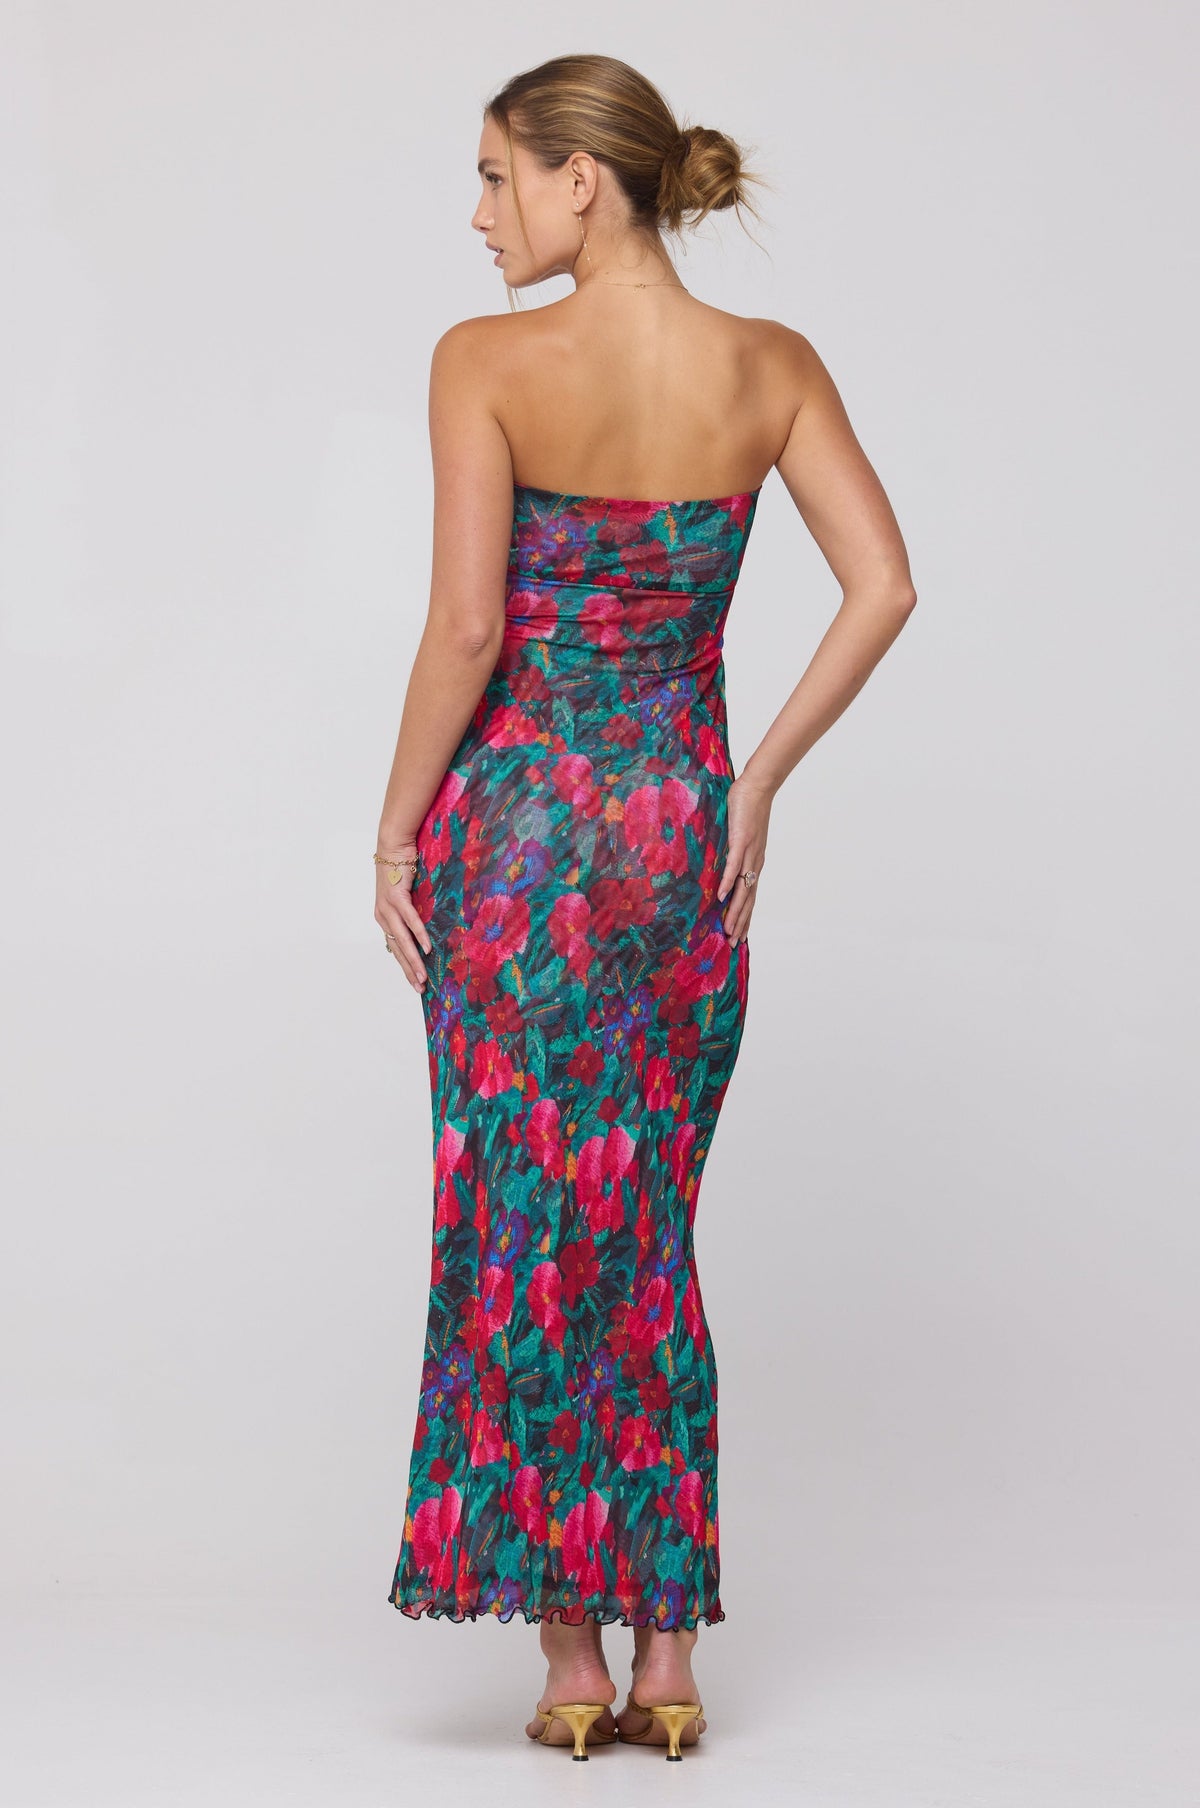 This is an image of Phoebe Dress in Resort - RESA featuring a model wearing the dress